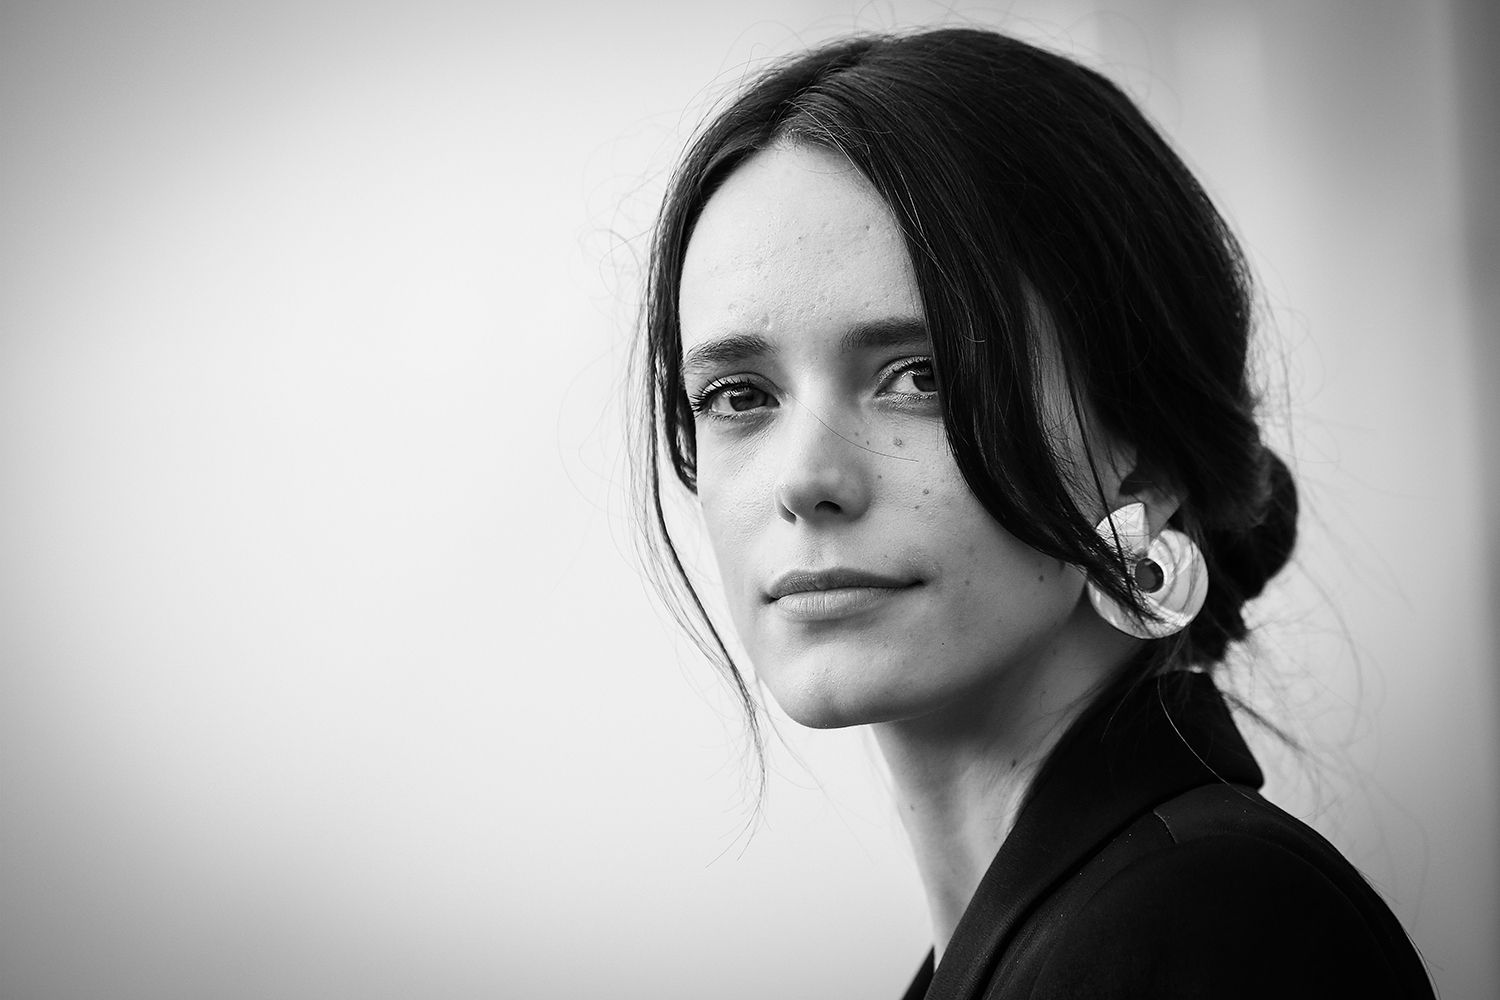 Stacy Martin “Sexualised female bodies have become normalised” picture